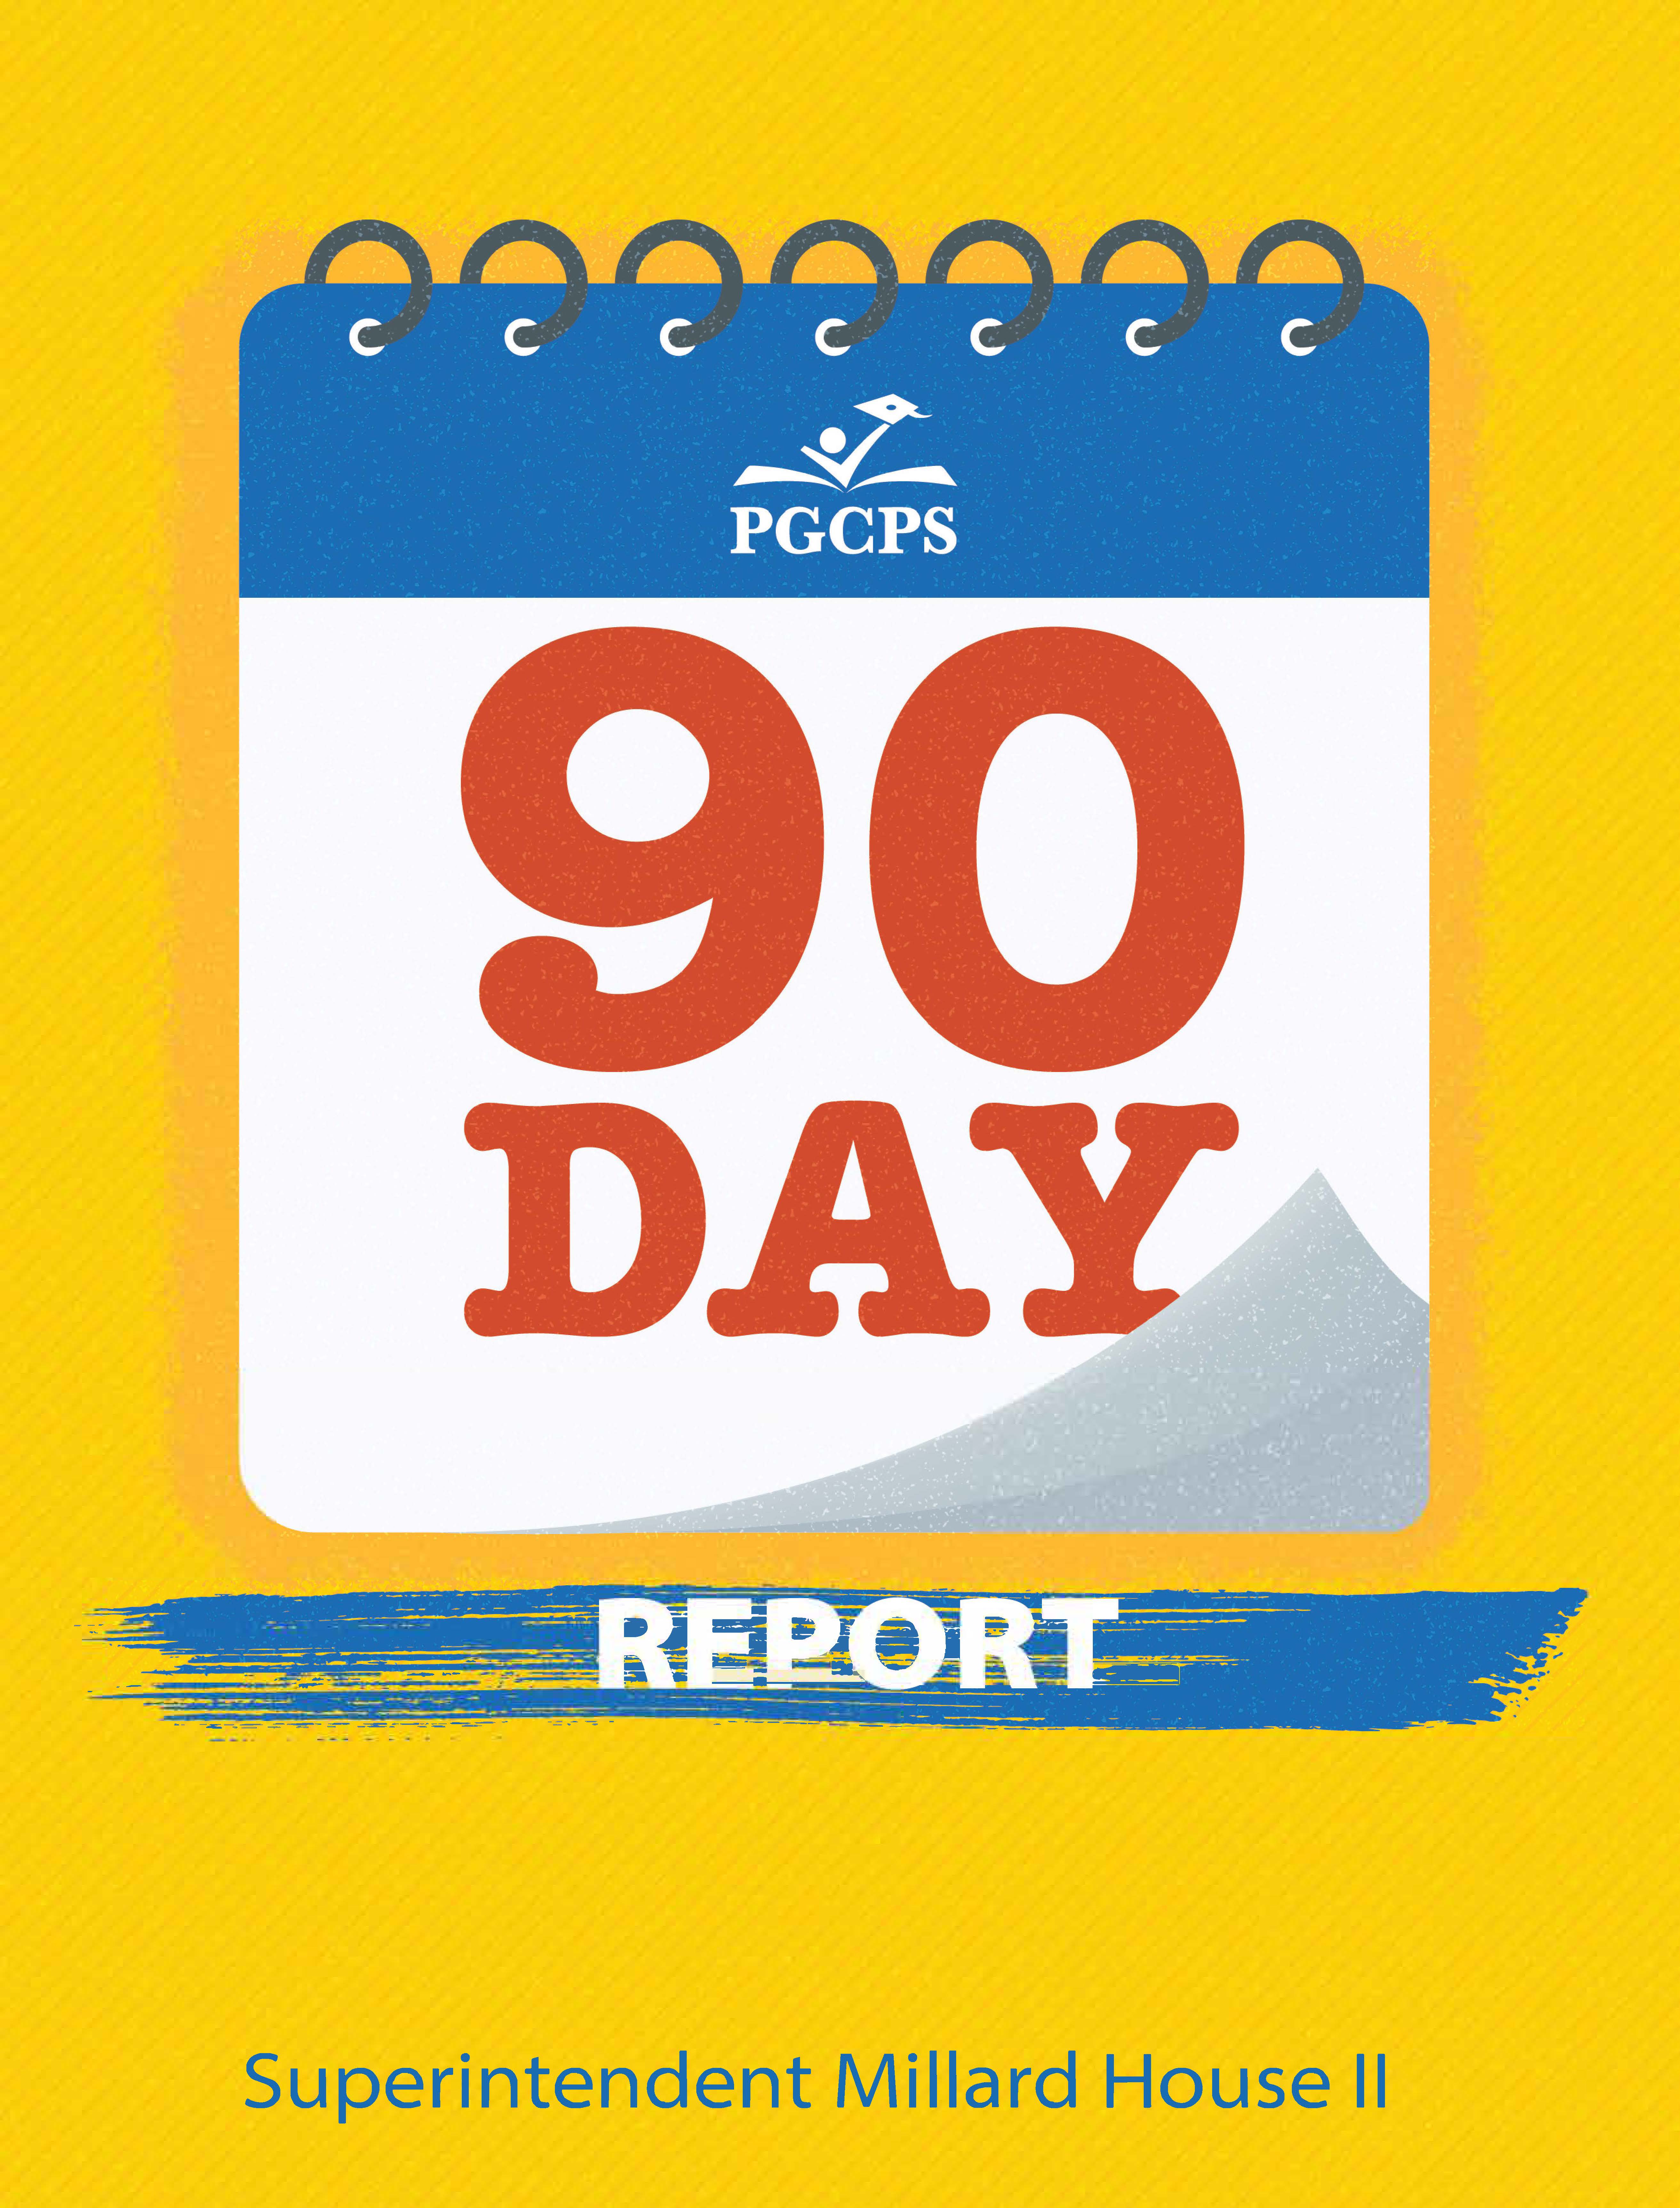 Cover for Superintendent's 90 Day Report.jpg